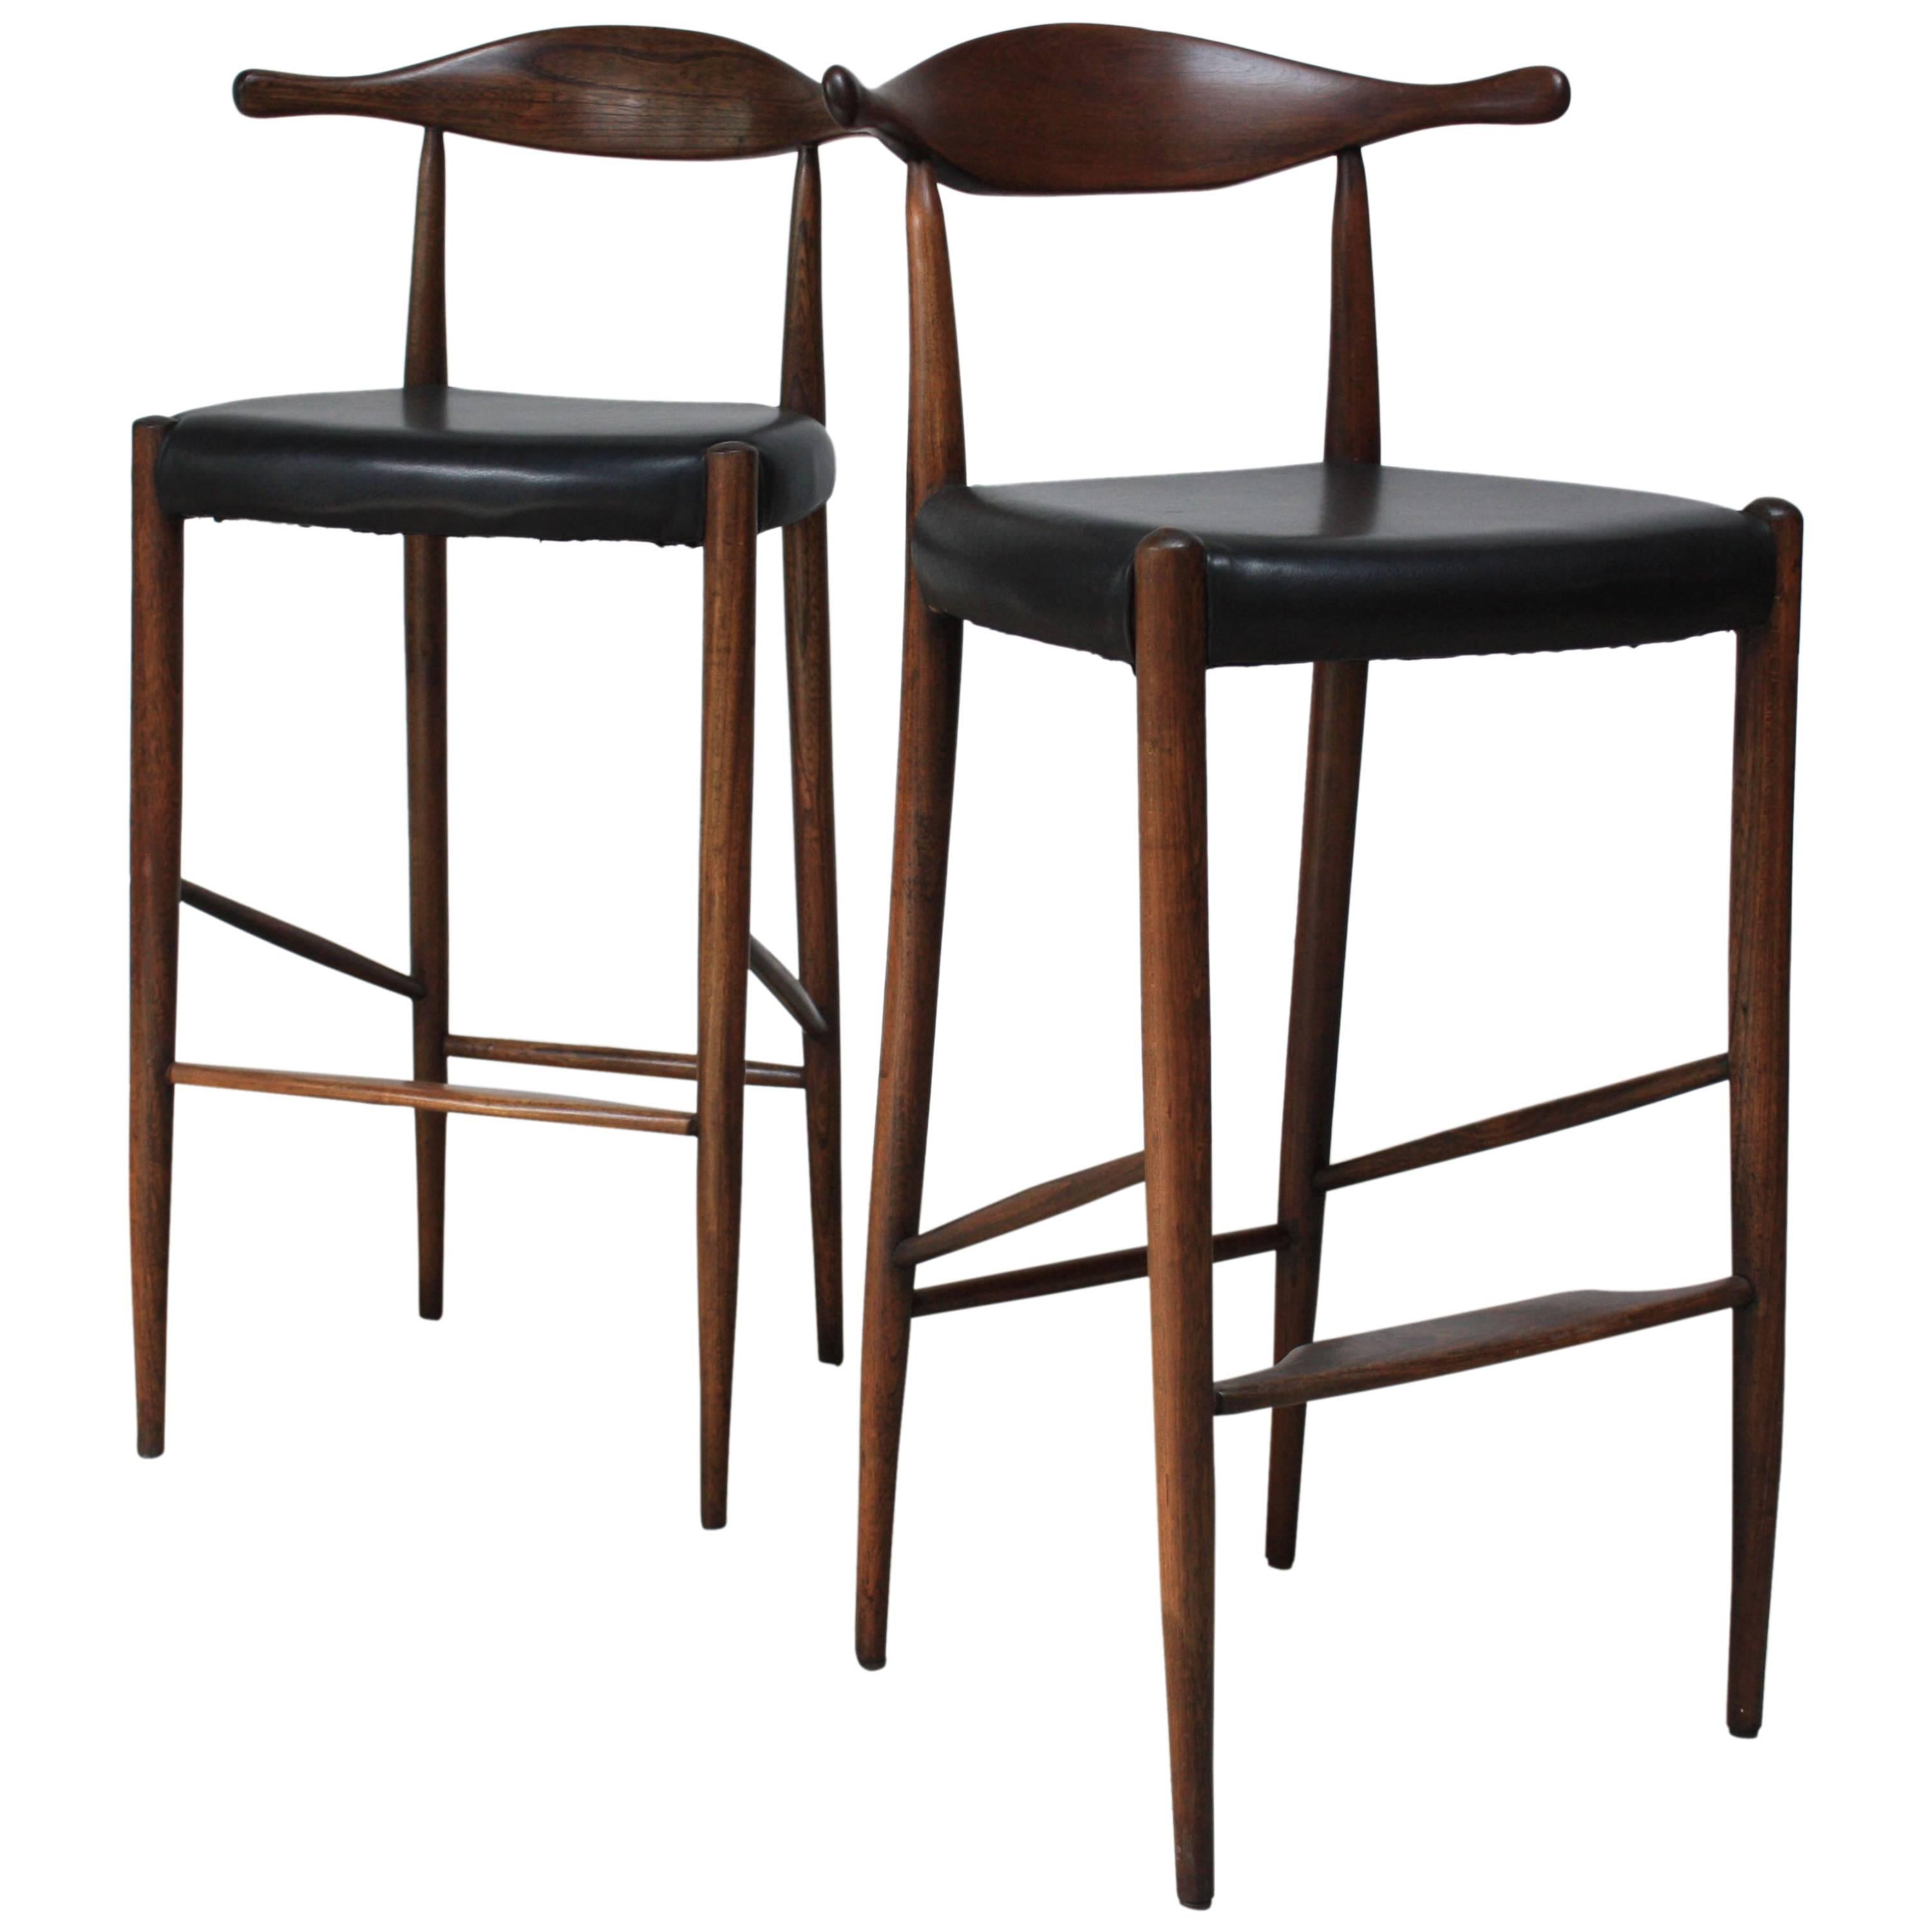 Pair of Danish Cow Horn Bar Stools in Teak and Leather after Hans Wegner